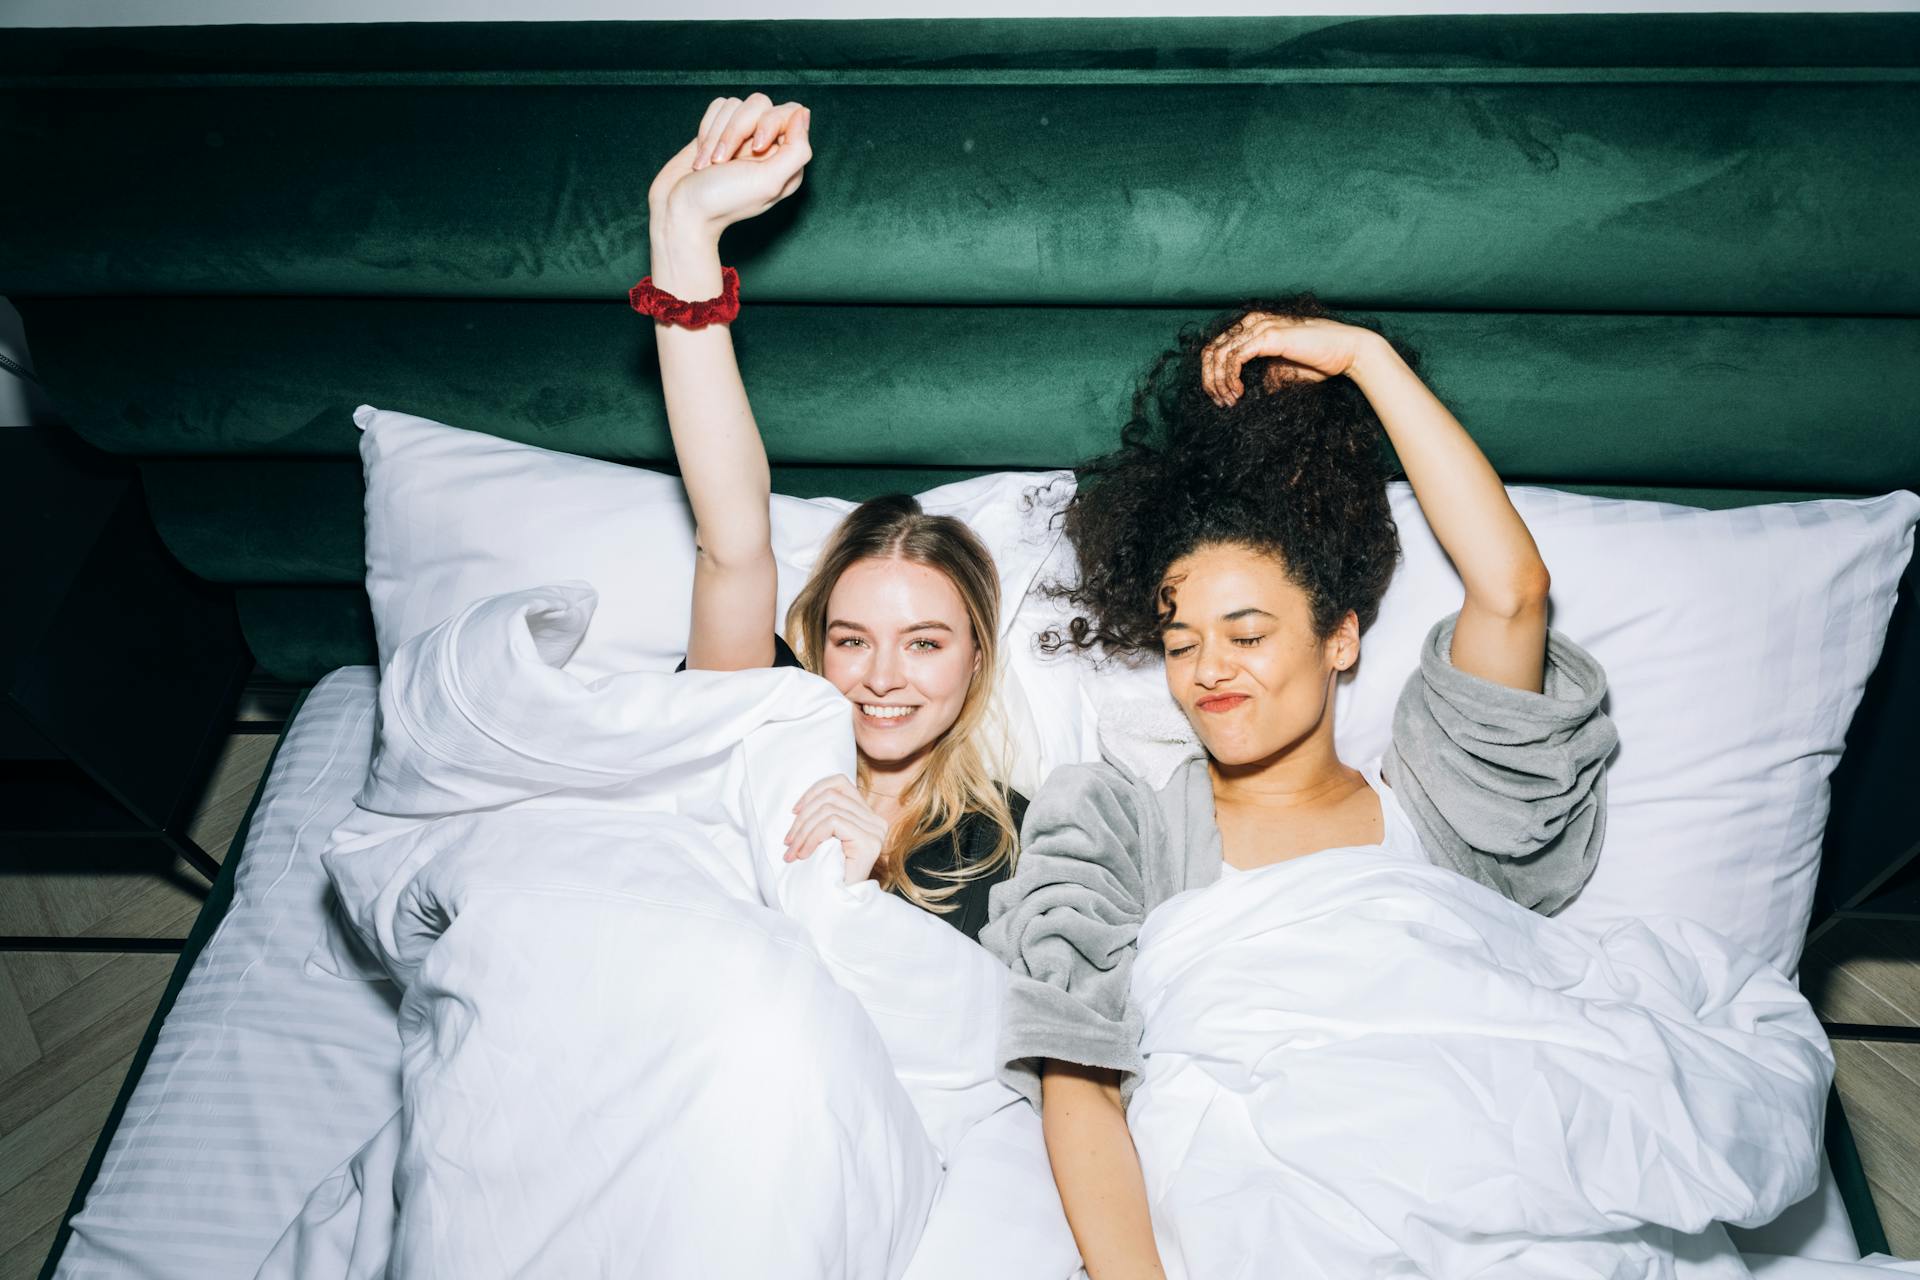 Two women lying on a bed | Source: Pexels